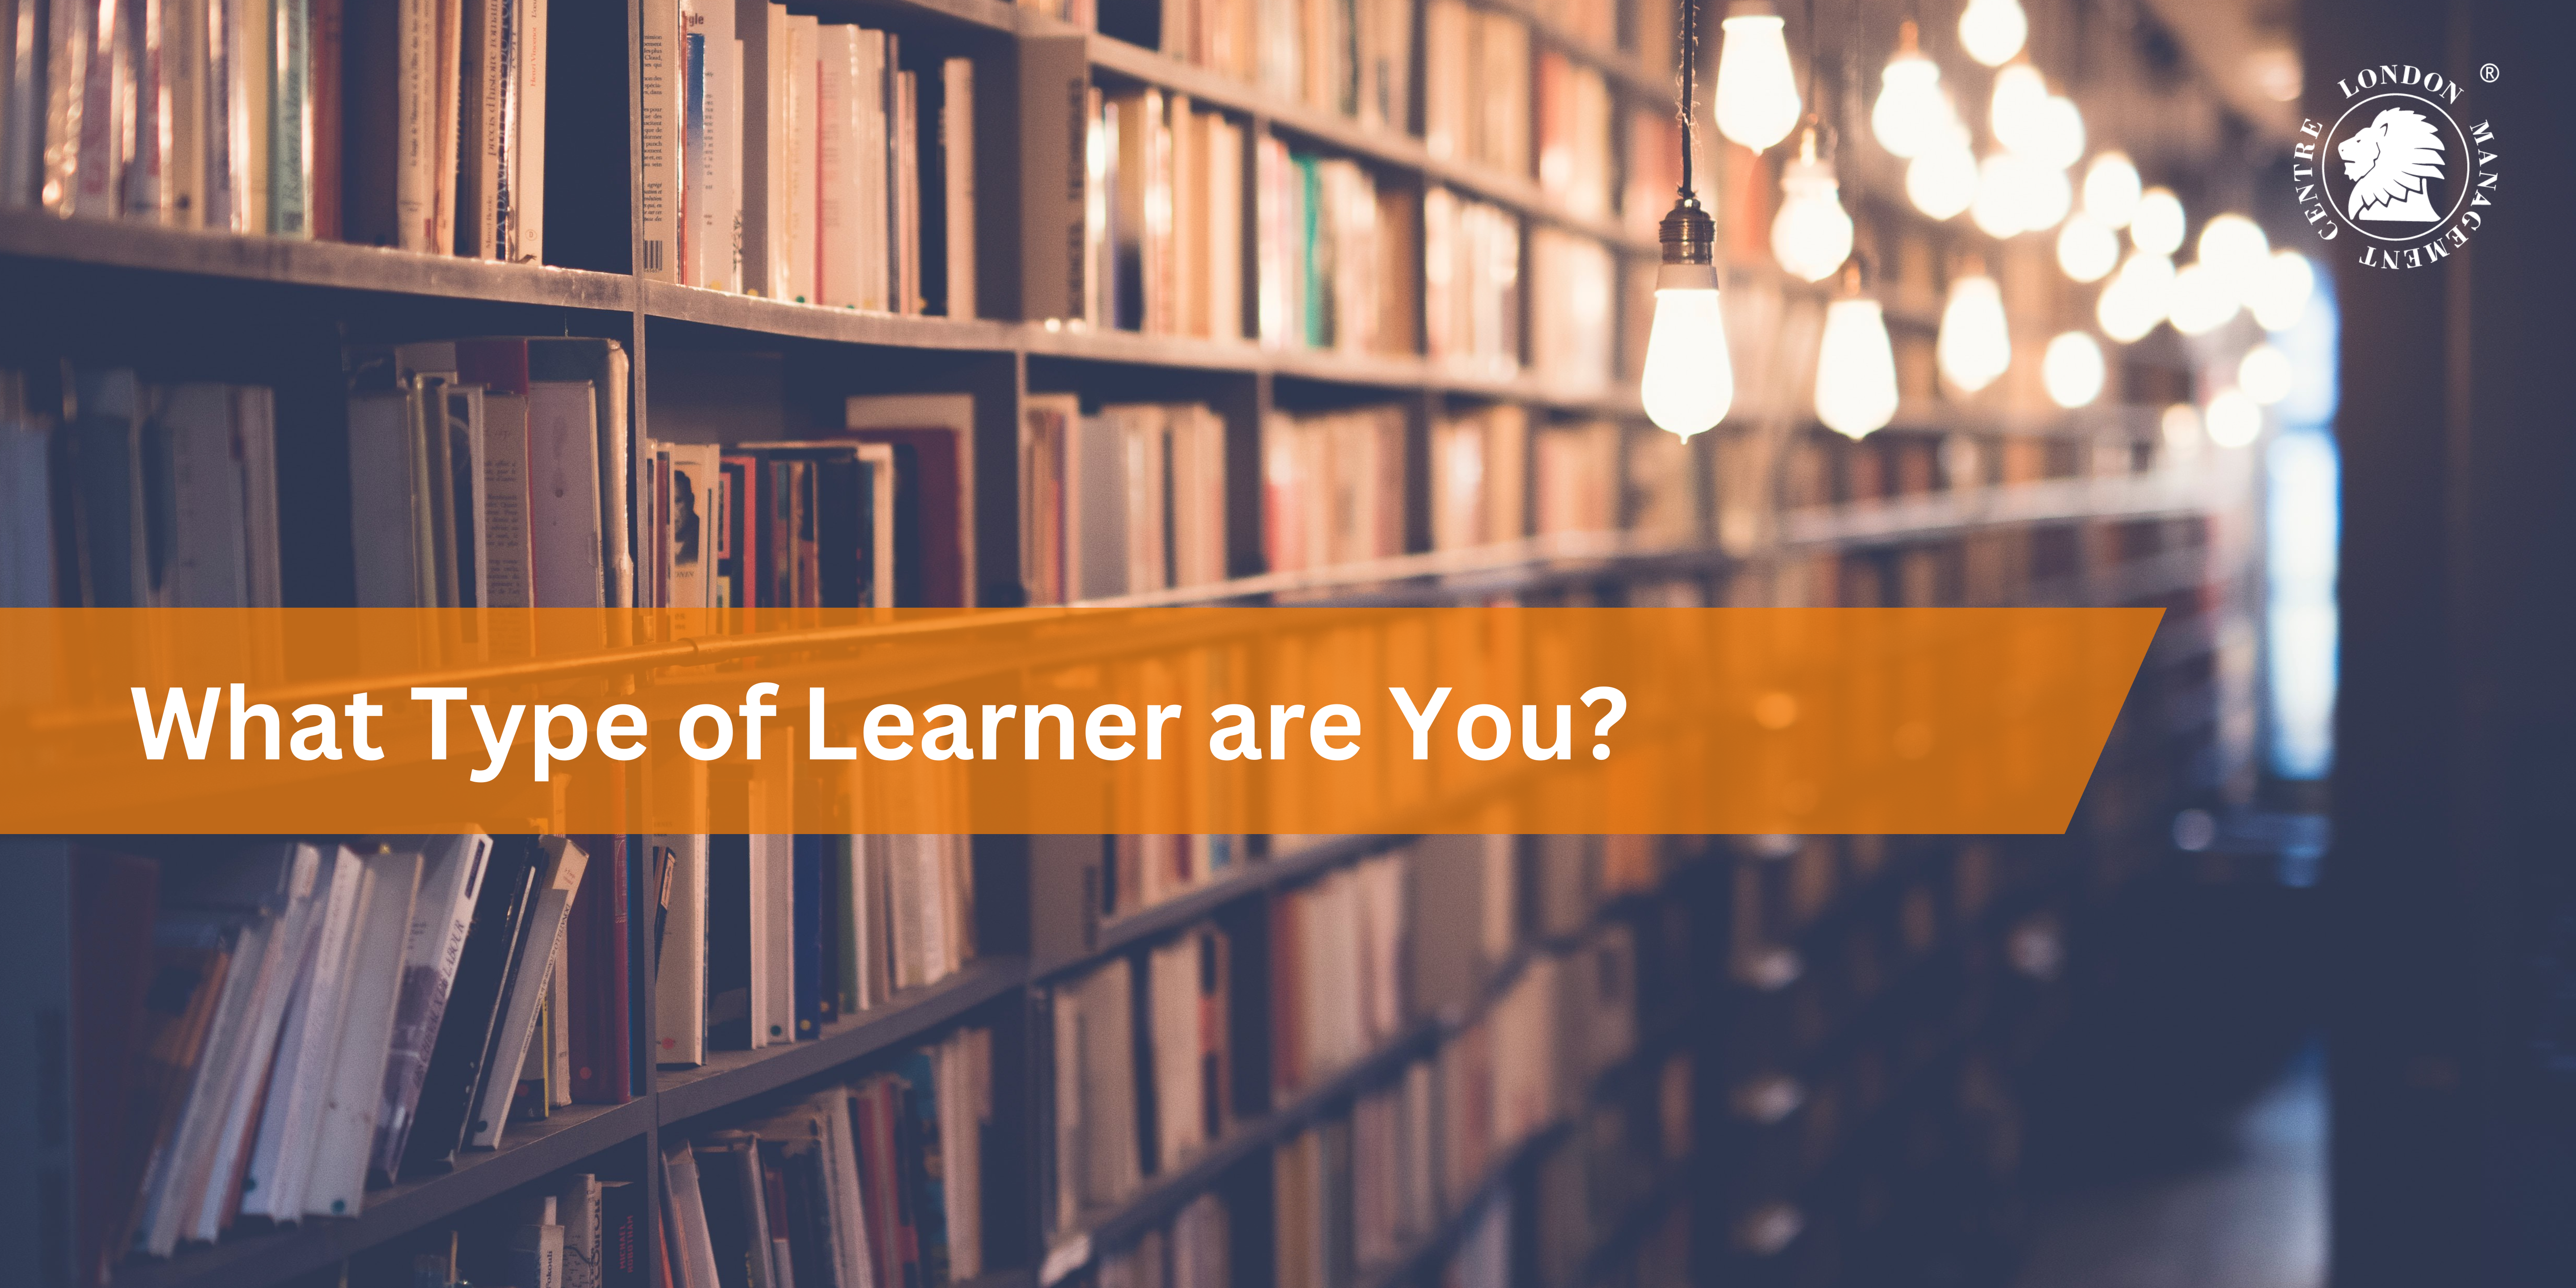 What Type of Learner are You?